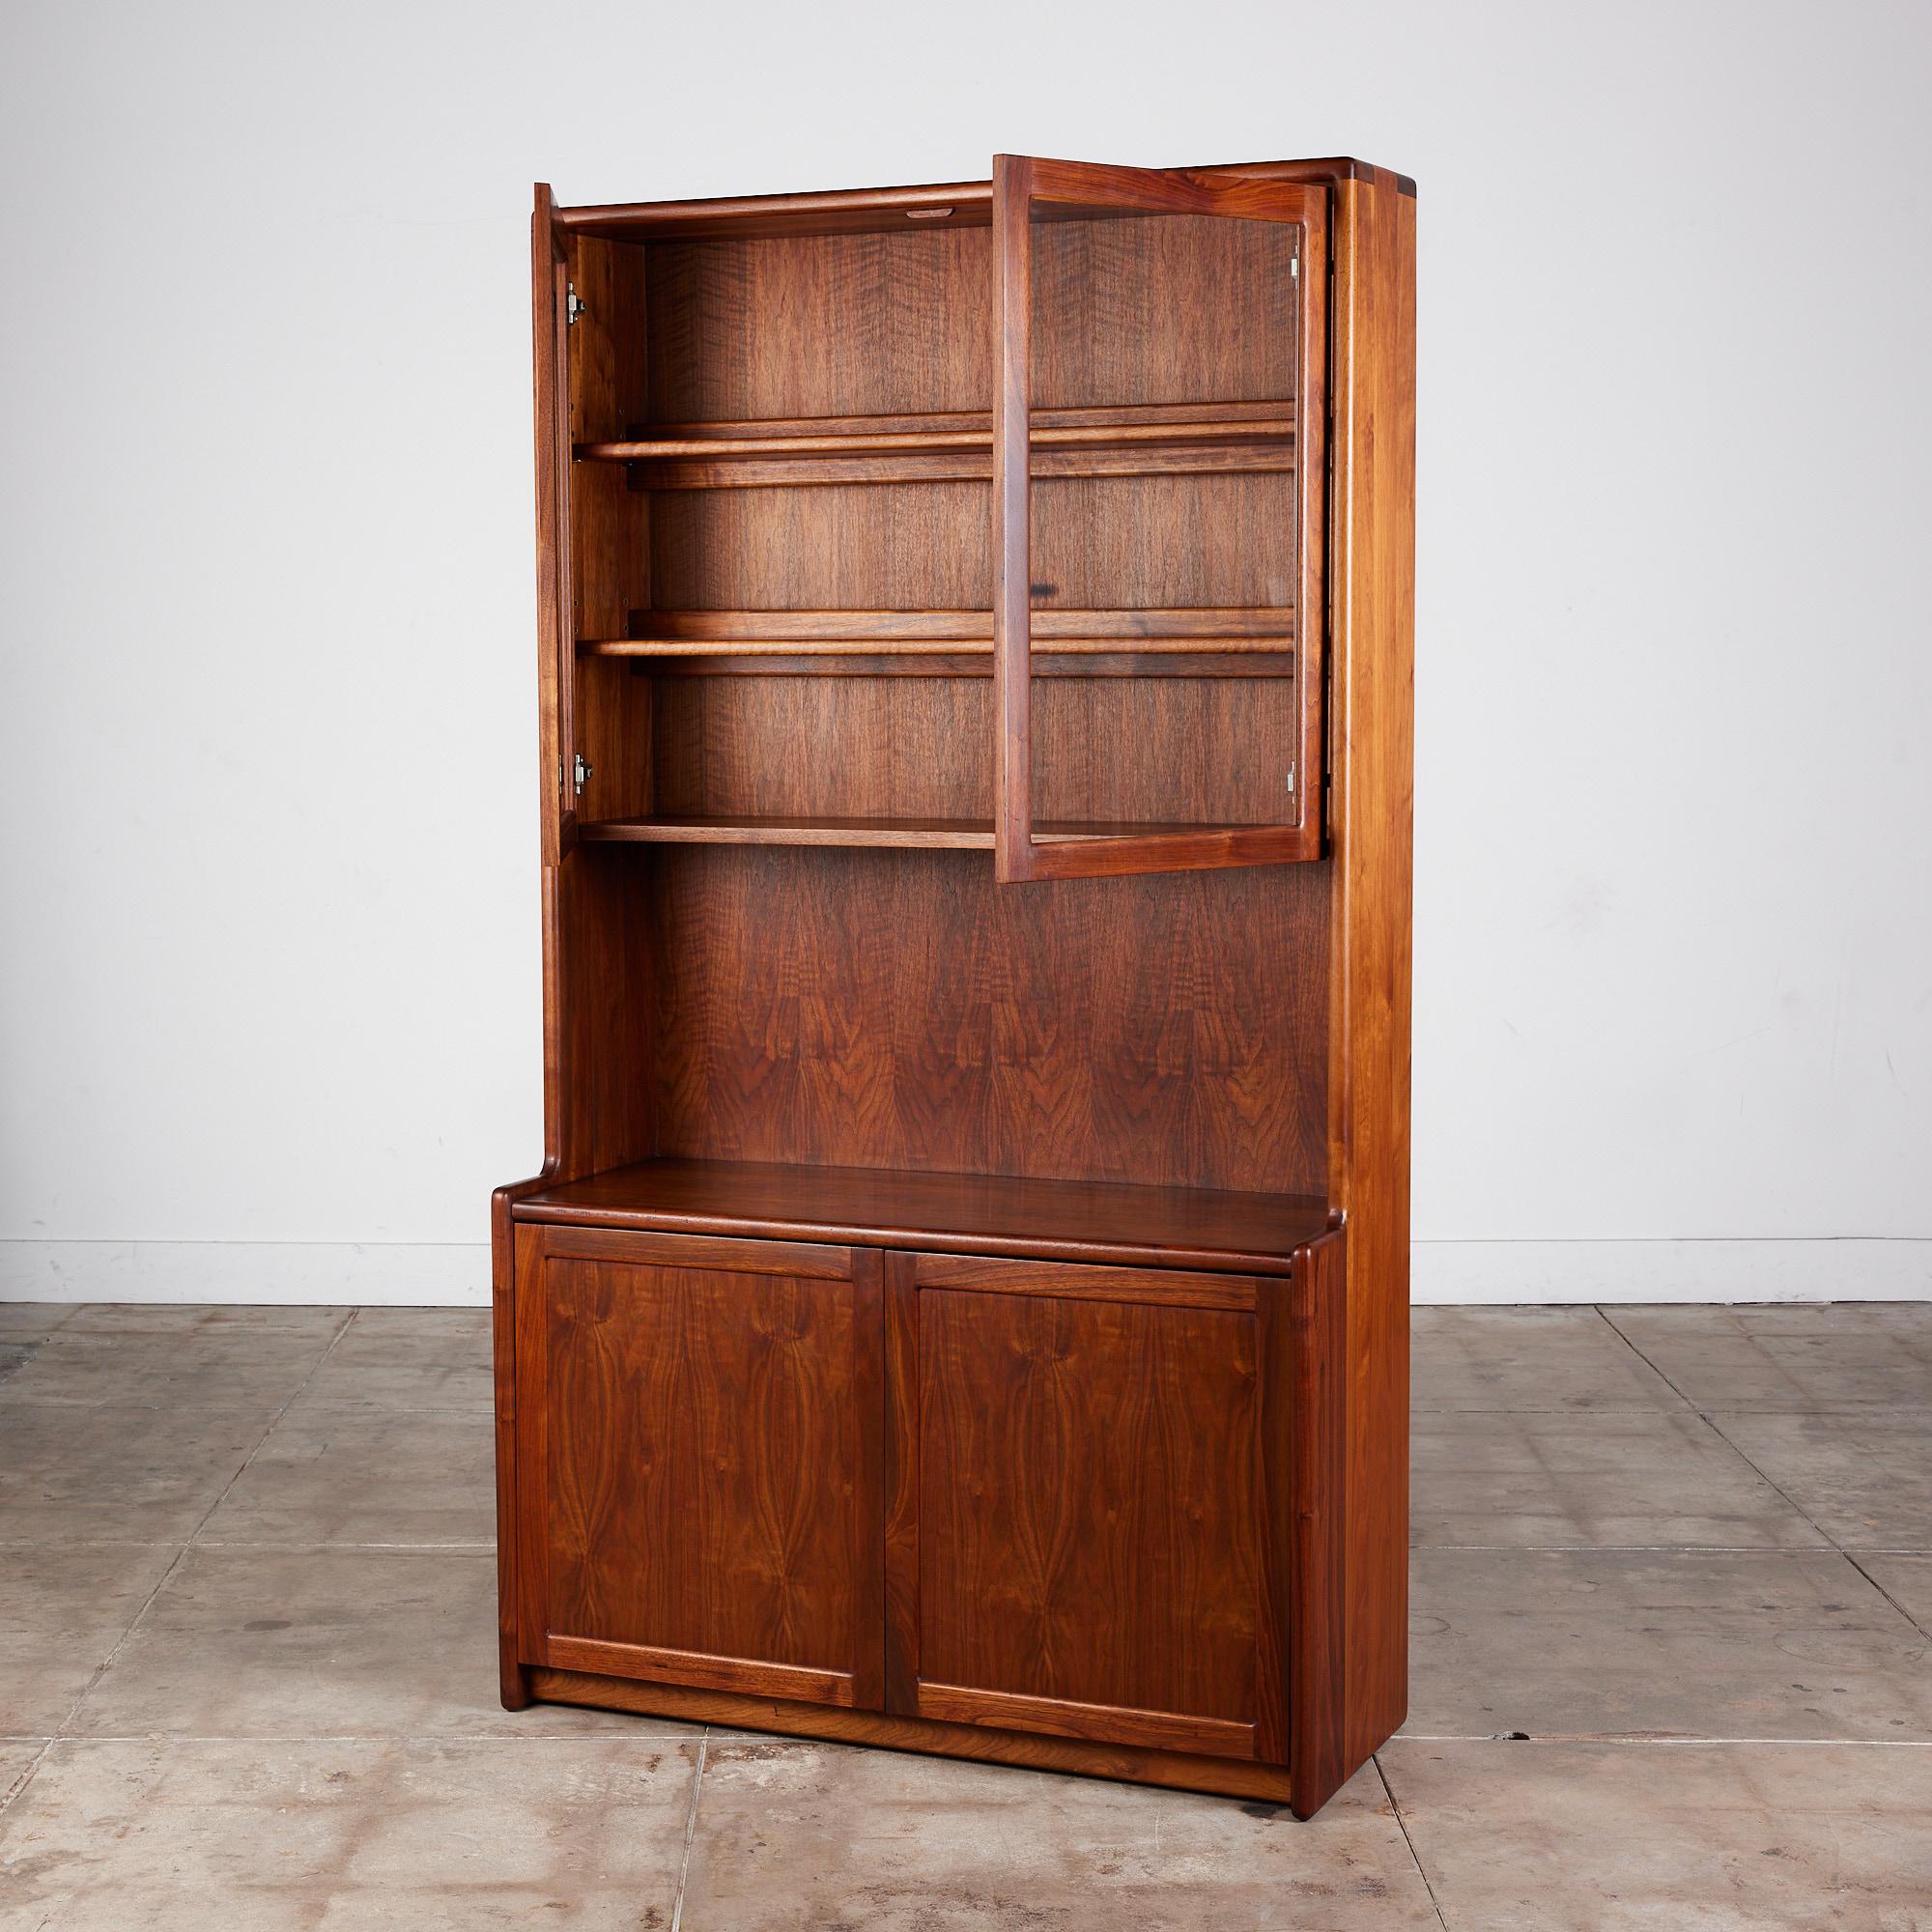 An American made sideboard by Gerald McCabe for Eon Furniture c.1970s, USA. The unique piece is crafted from gorgeous solid Shedua wood, also known as African Walnut. Its rounded edges give the large storage unit a softer feel. The piece features a